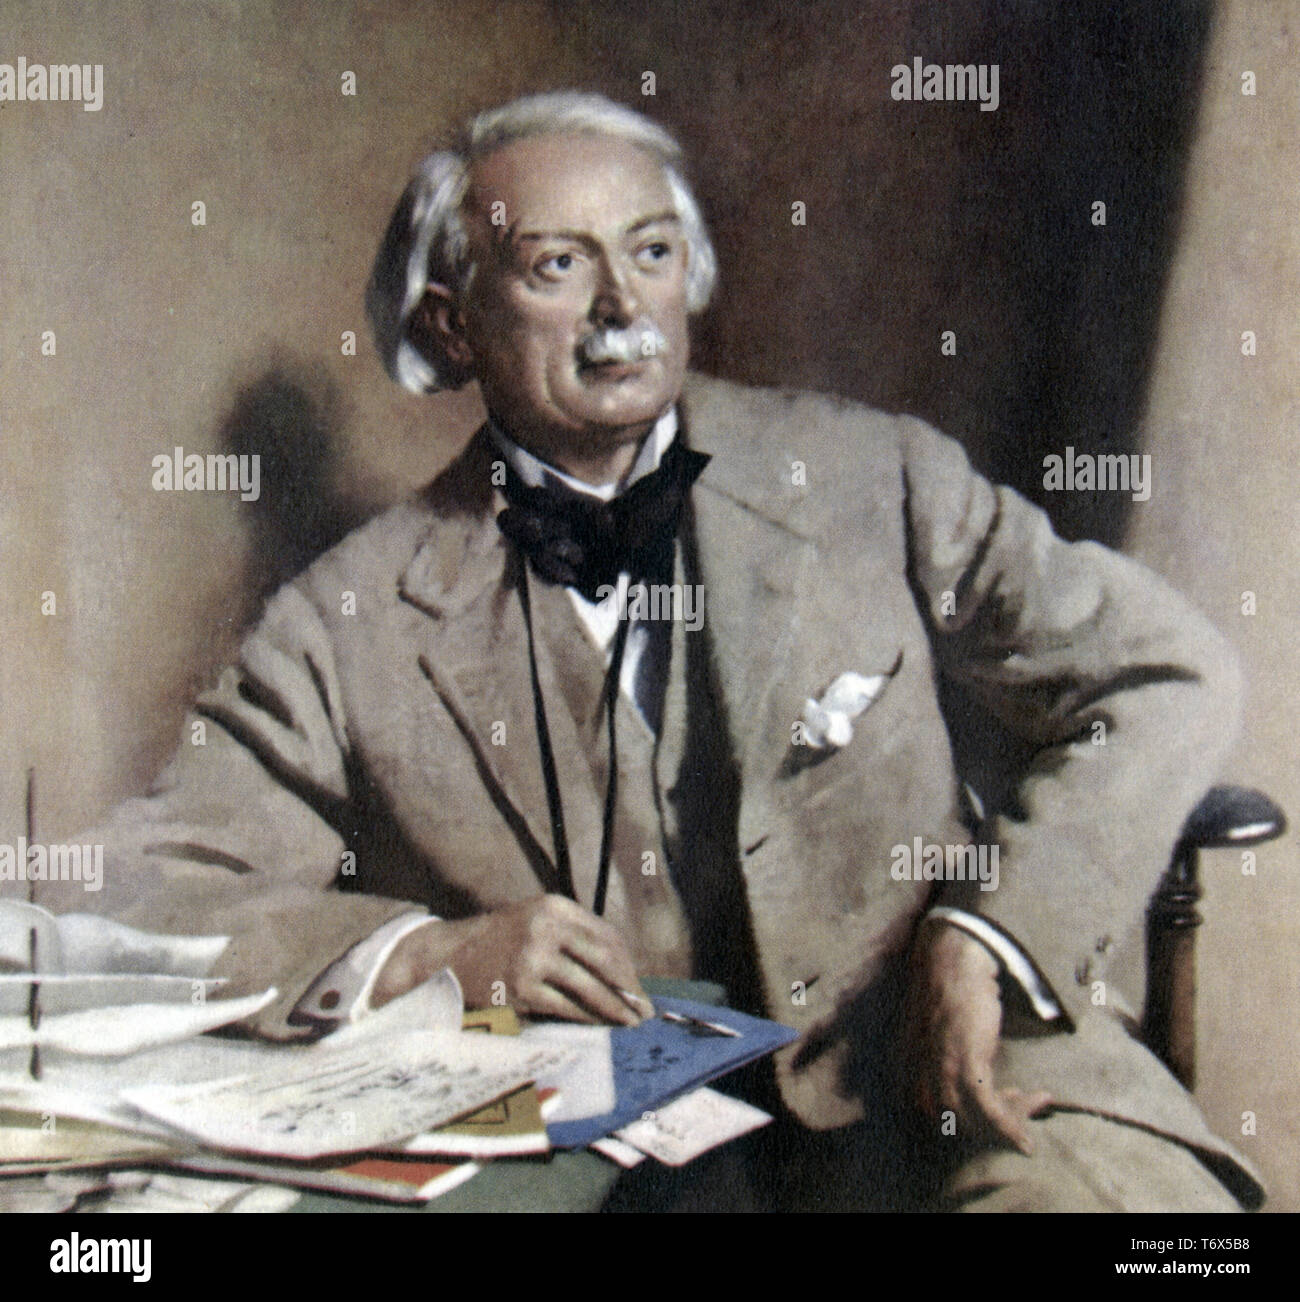 David Lloyd George (1863-1945), 1927. By Sir William Orpen. David Lloyd George, 1st Earl Lloyd-George of Dwyfor (1863-1945), British statesman and Liberal Party politician. He was the last Liberal to serve as Prime Minister of the United Kingdom. Stock Photo